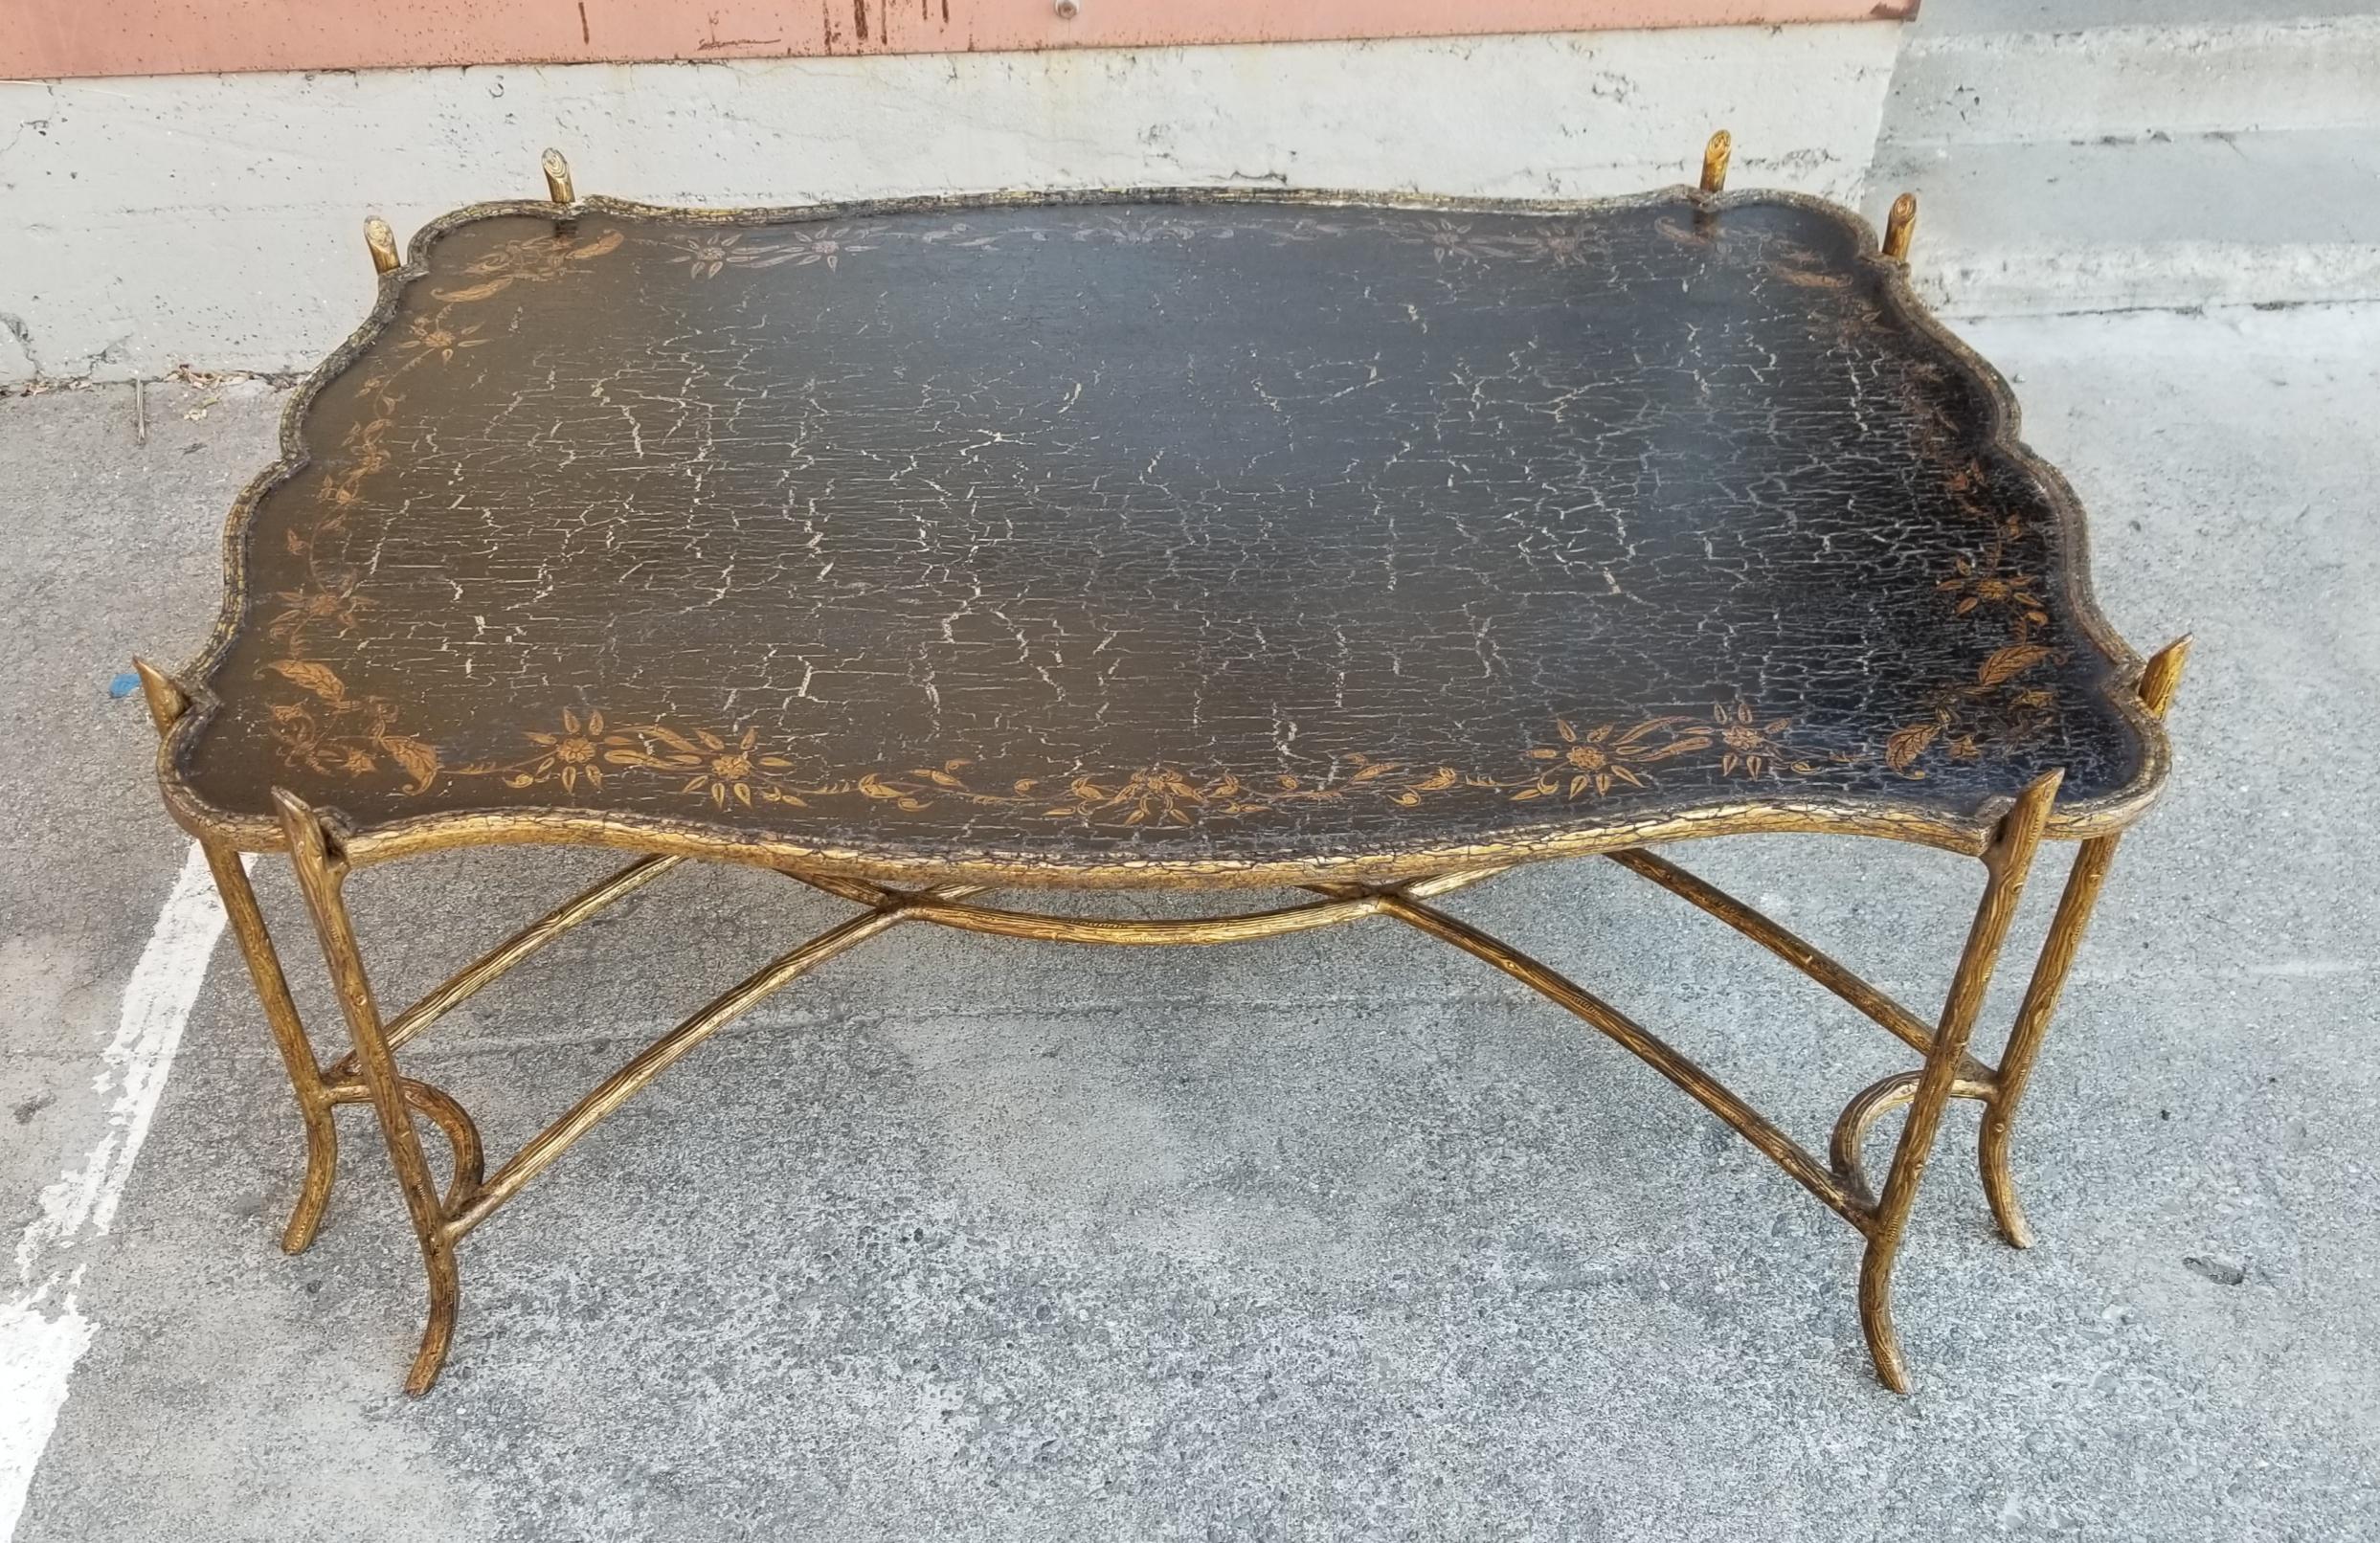 Fine Dennis and Leen coffee table with organic branch motif cast and gilt faux bronze iron base and rustic / distressed chinoiserie style painted wood top. Table top may be lifted from base as a large tray table or attached to base with wood screws